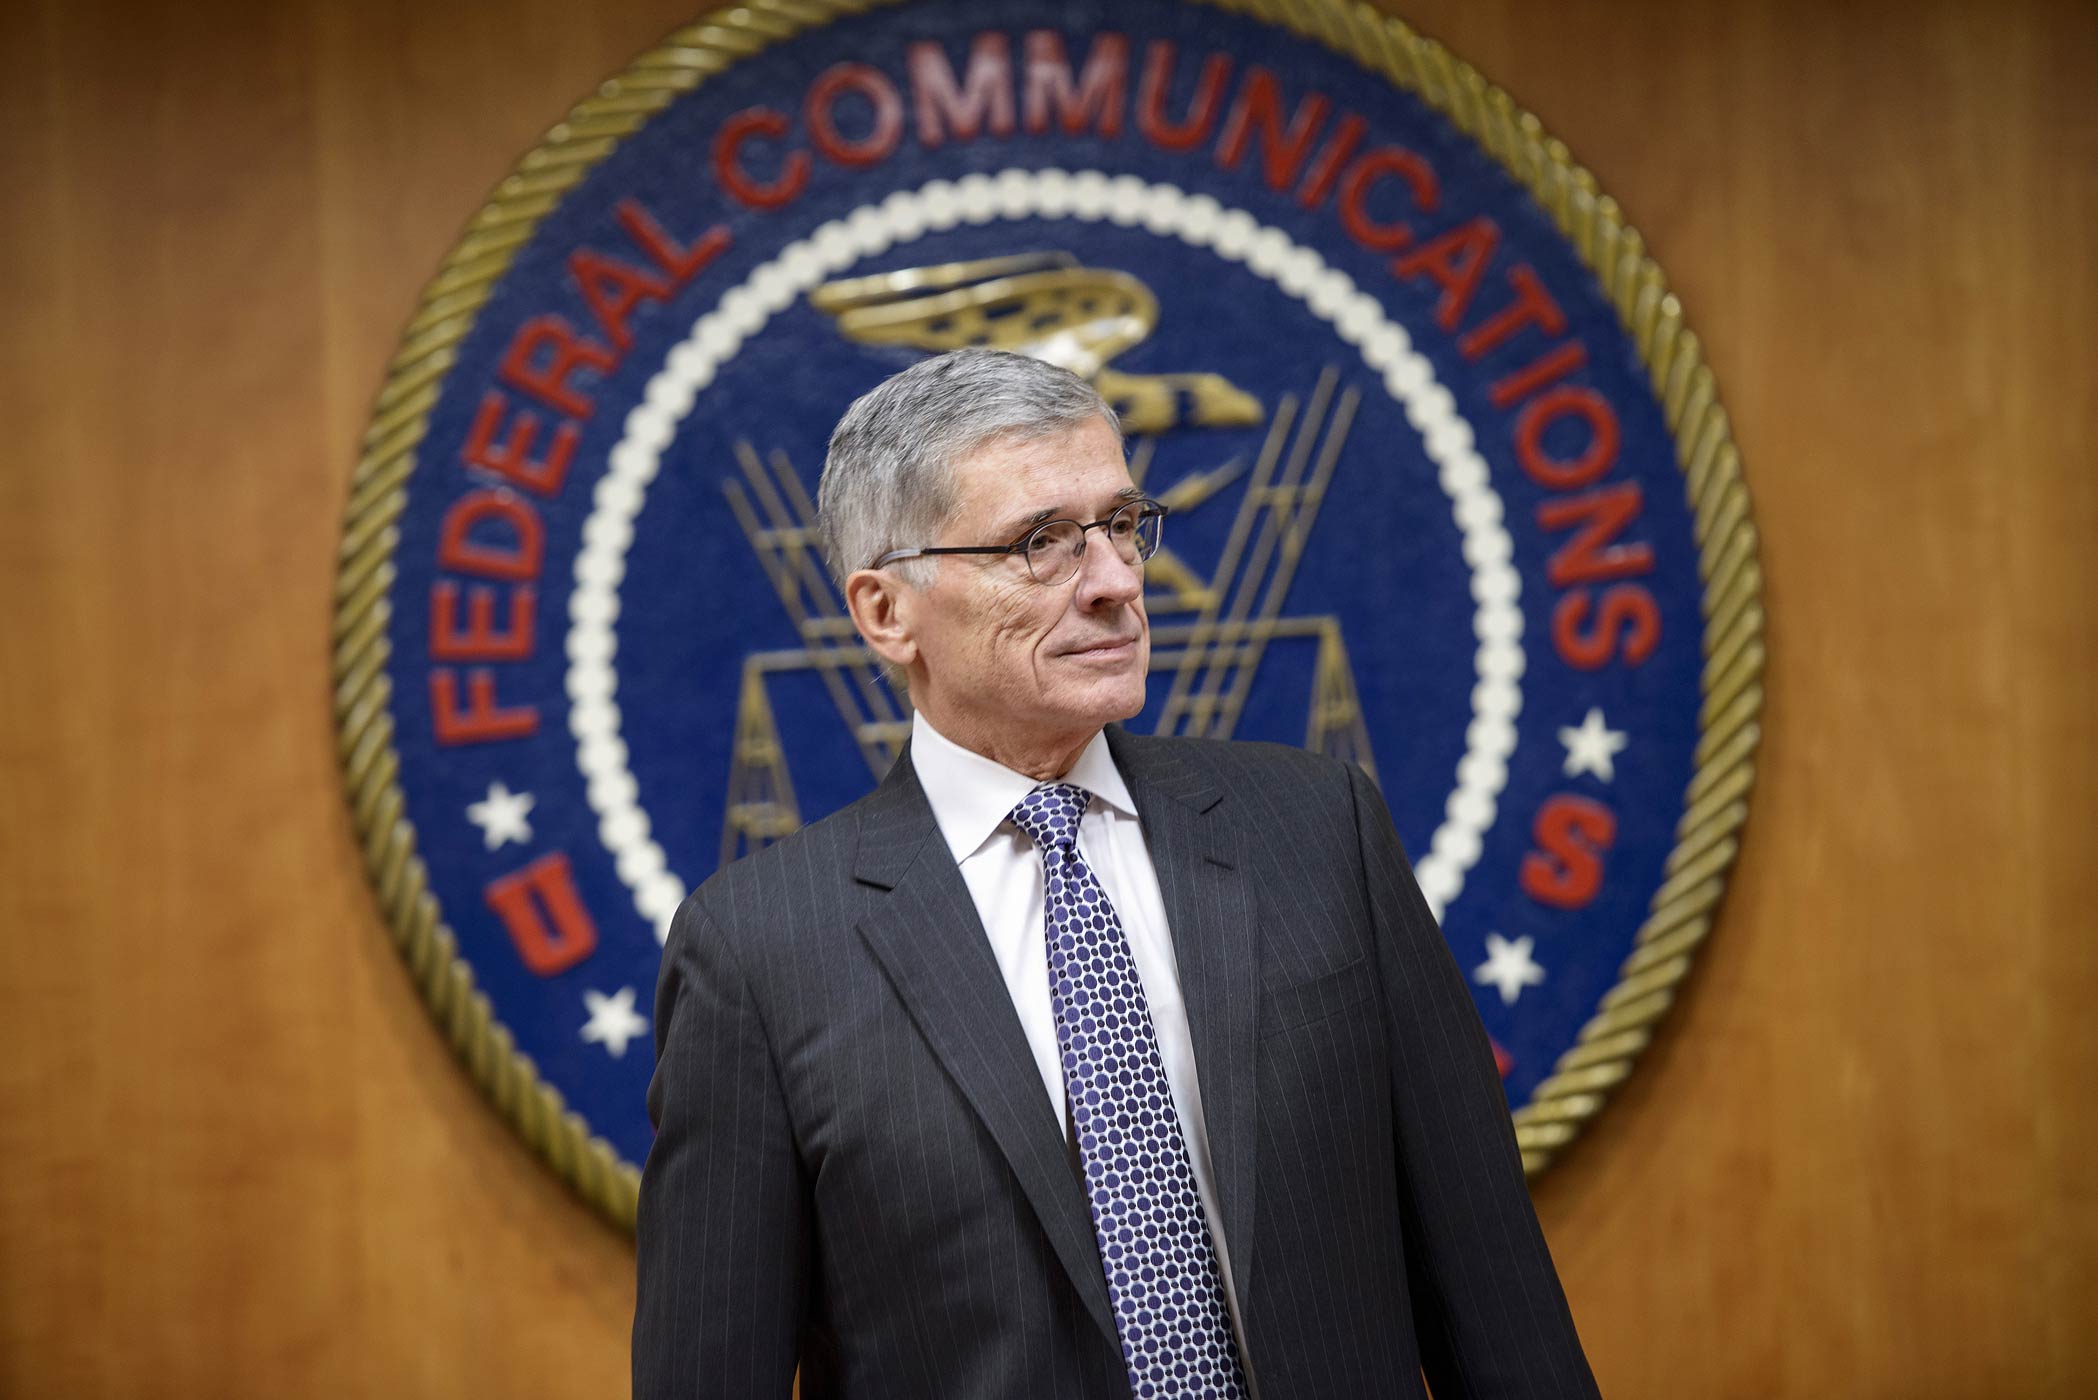 Federal Communication Commission Chairman Tom Wheeler waits for a hearing at the FCC on Dec. 11, 2014 in Washington, DC. (Brendan Smialowski—AFP/Getty Images)